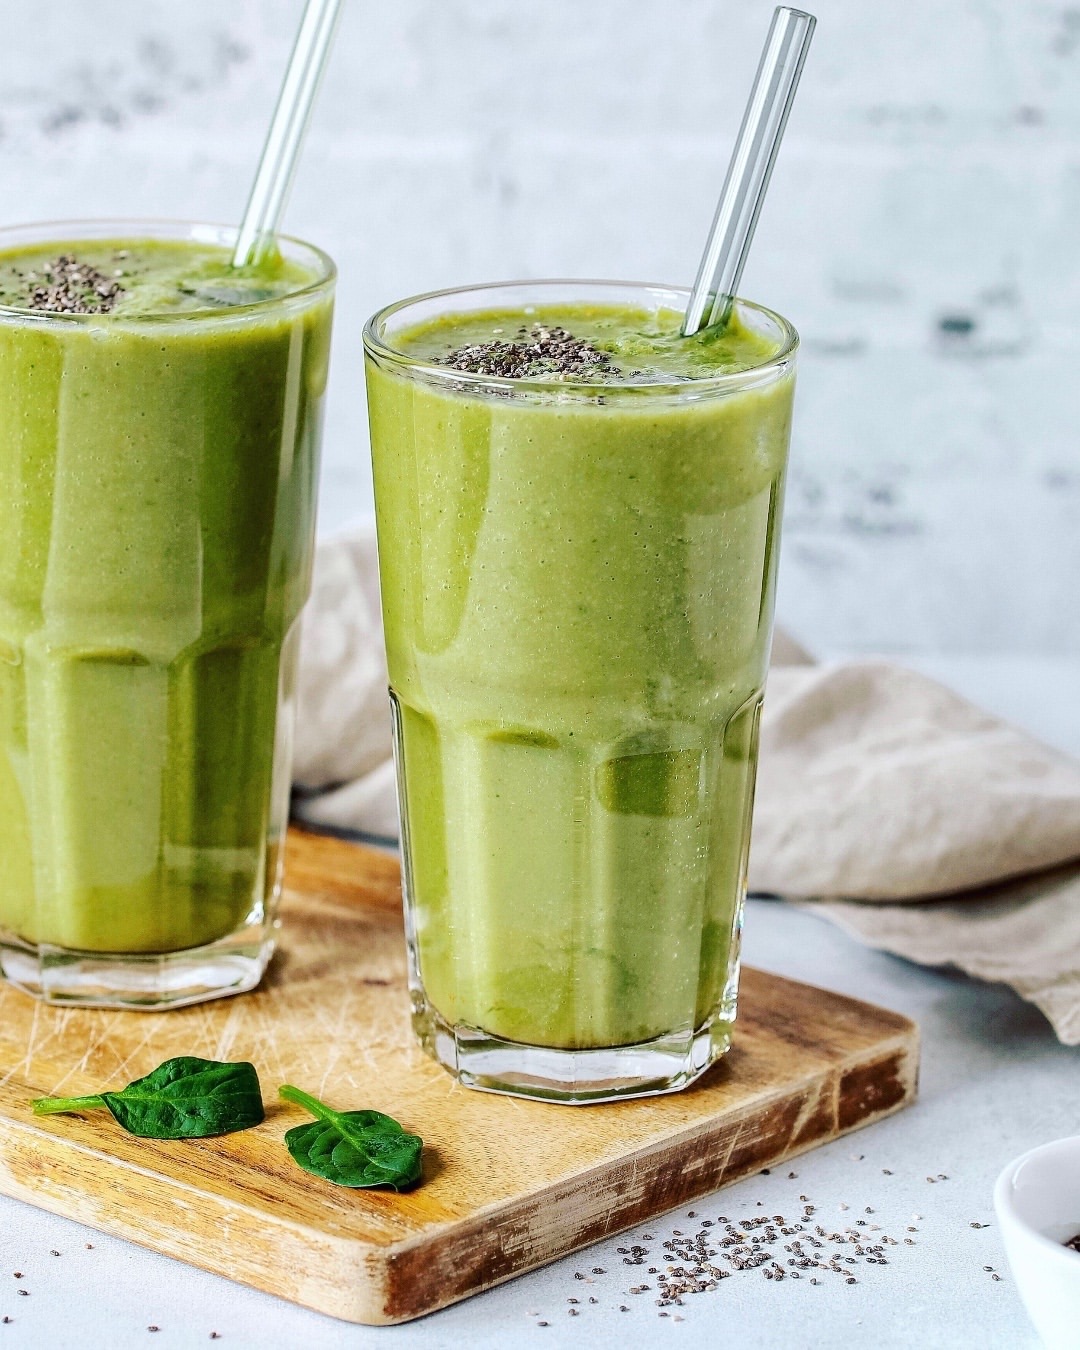 Recipes for Green Vegetable  Drinks That Are Sooo Good for You ...